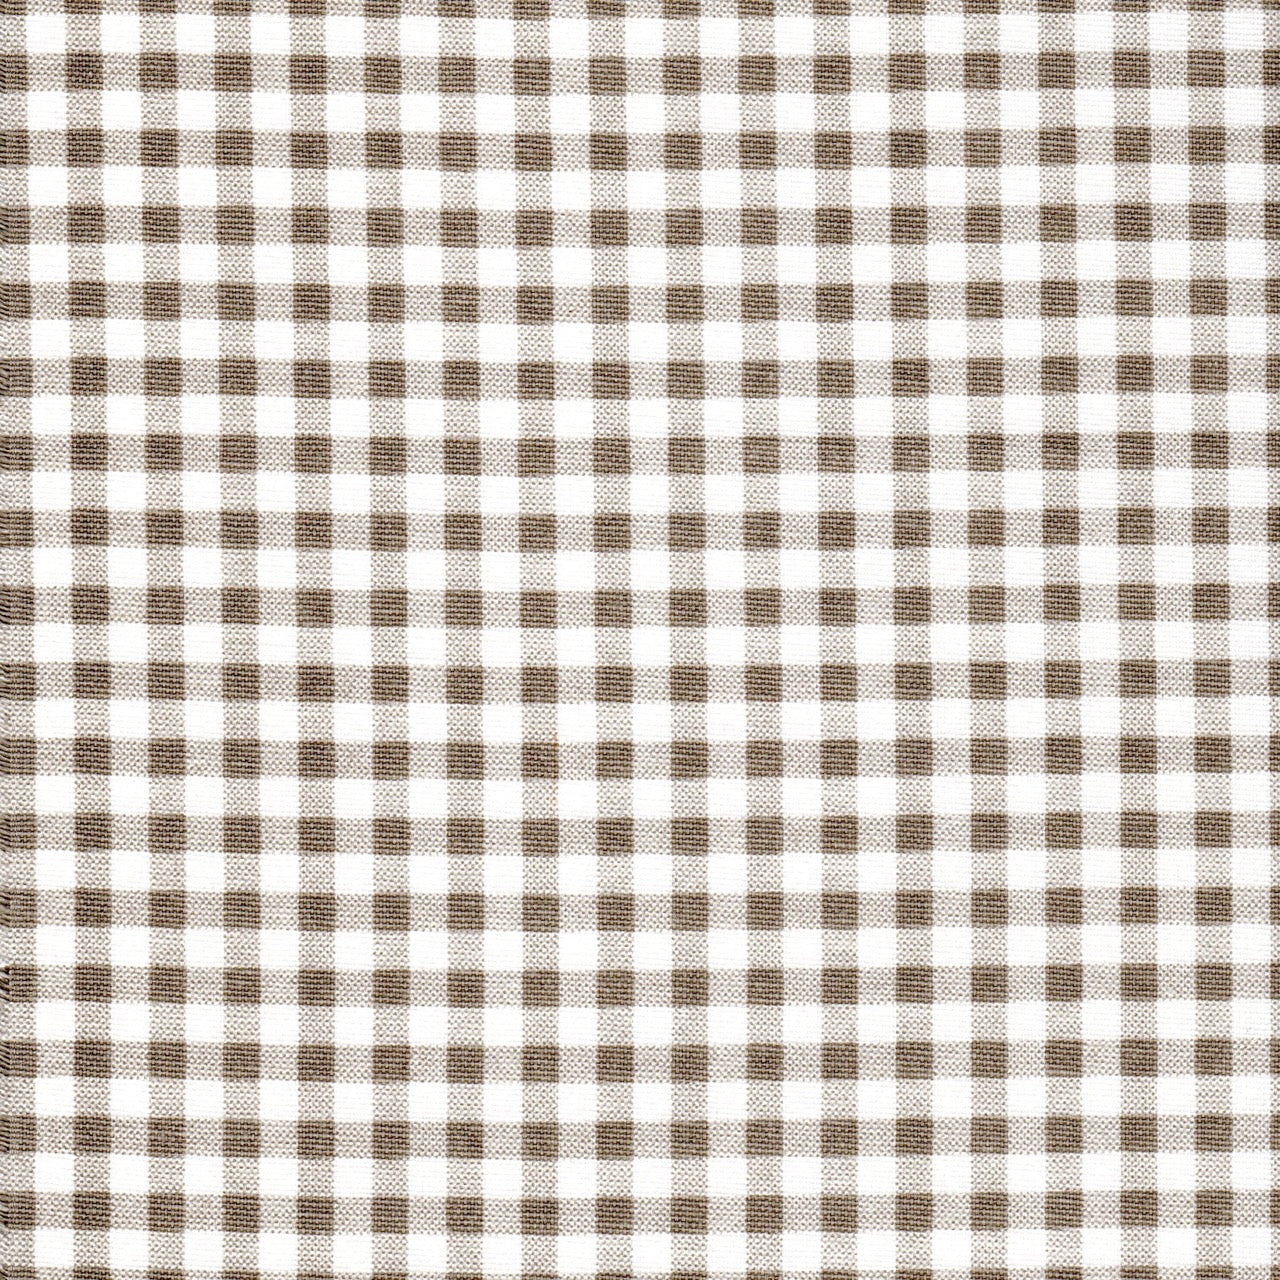 Pinch Pleated Curtains in Ecru Large Gingham Check on White